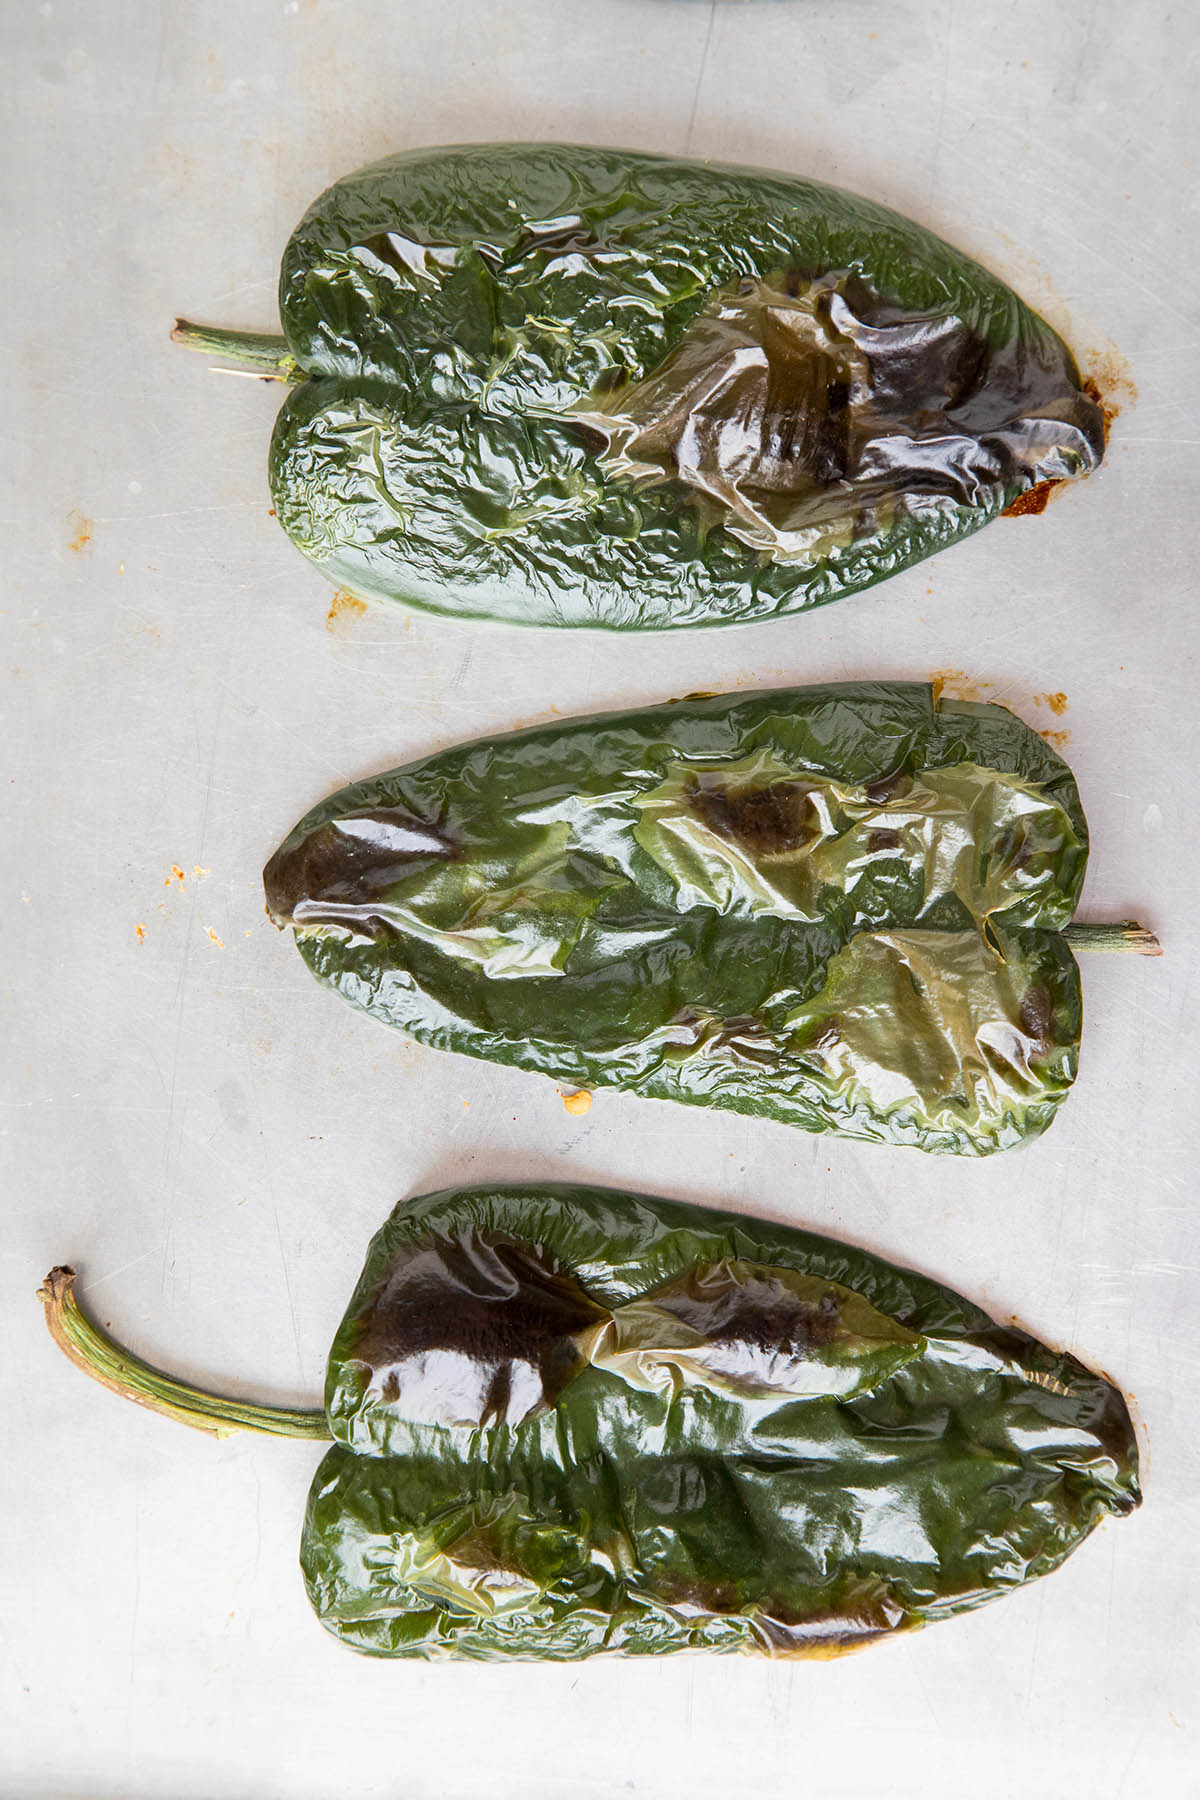 These Poblano Peppers are Roasted and Ready for Stuffing for Our Picadillo Stuffed Poblano Peppers Recipe